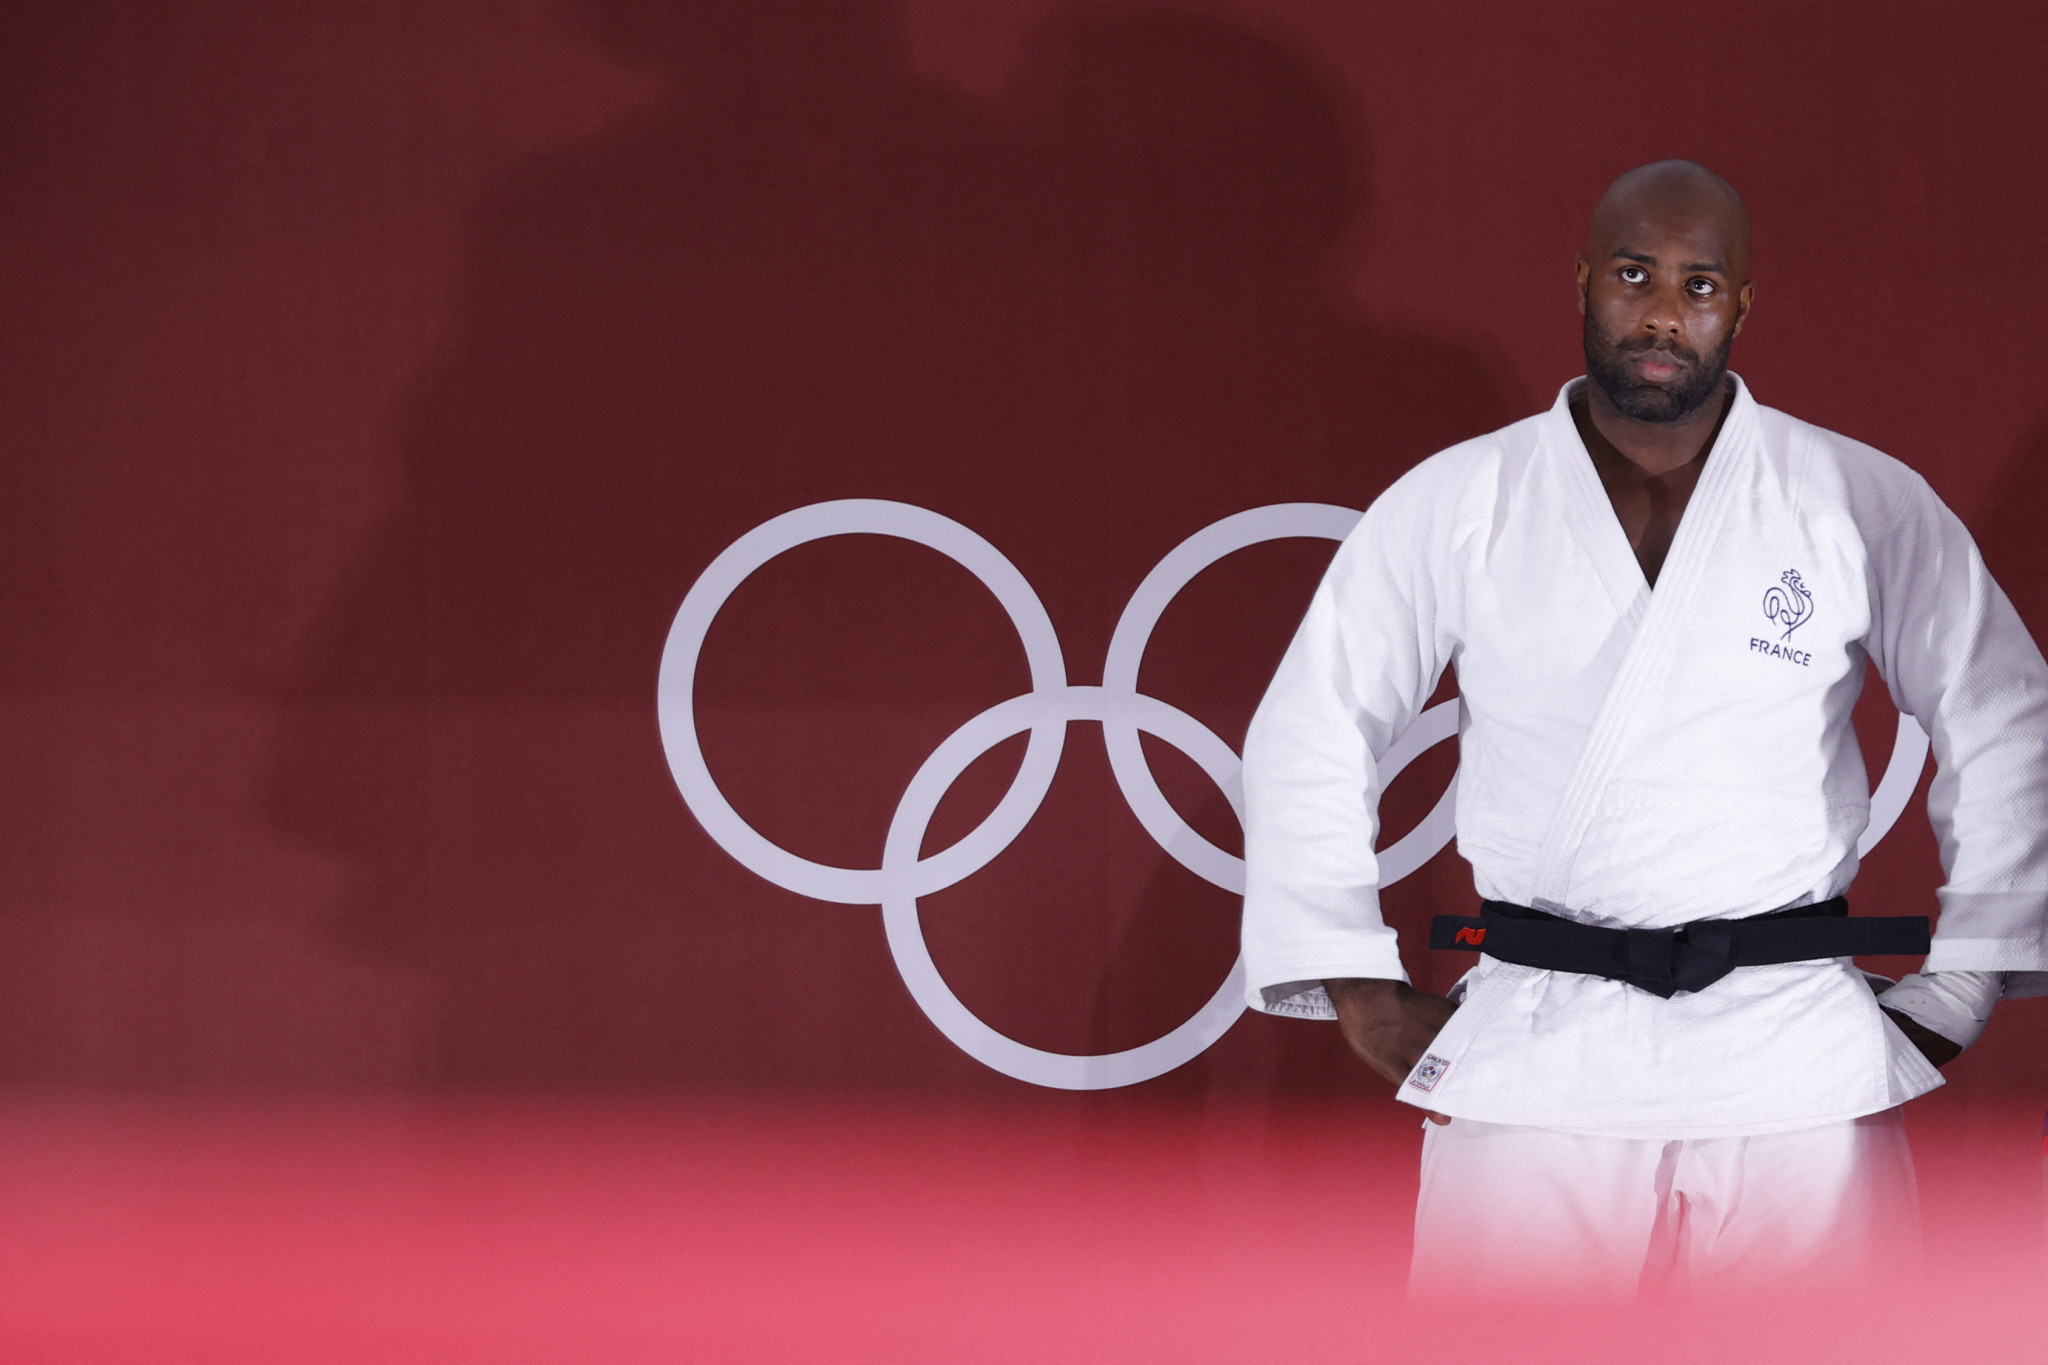 Judo great Teddy Riner missed the chance to win his third Olympic title in a row but recovered to win bronze ©Getty Images